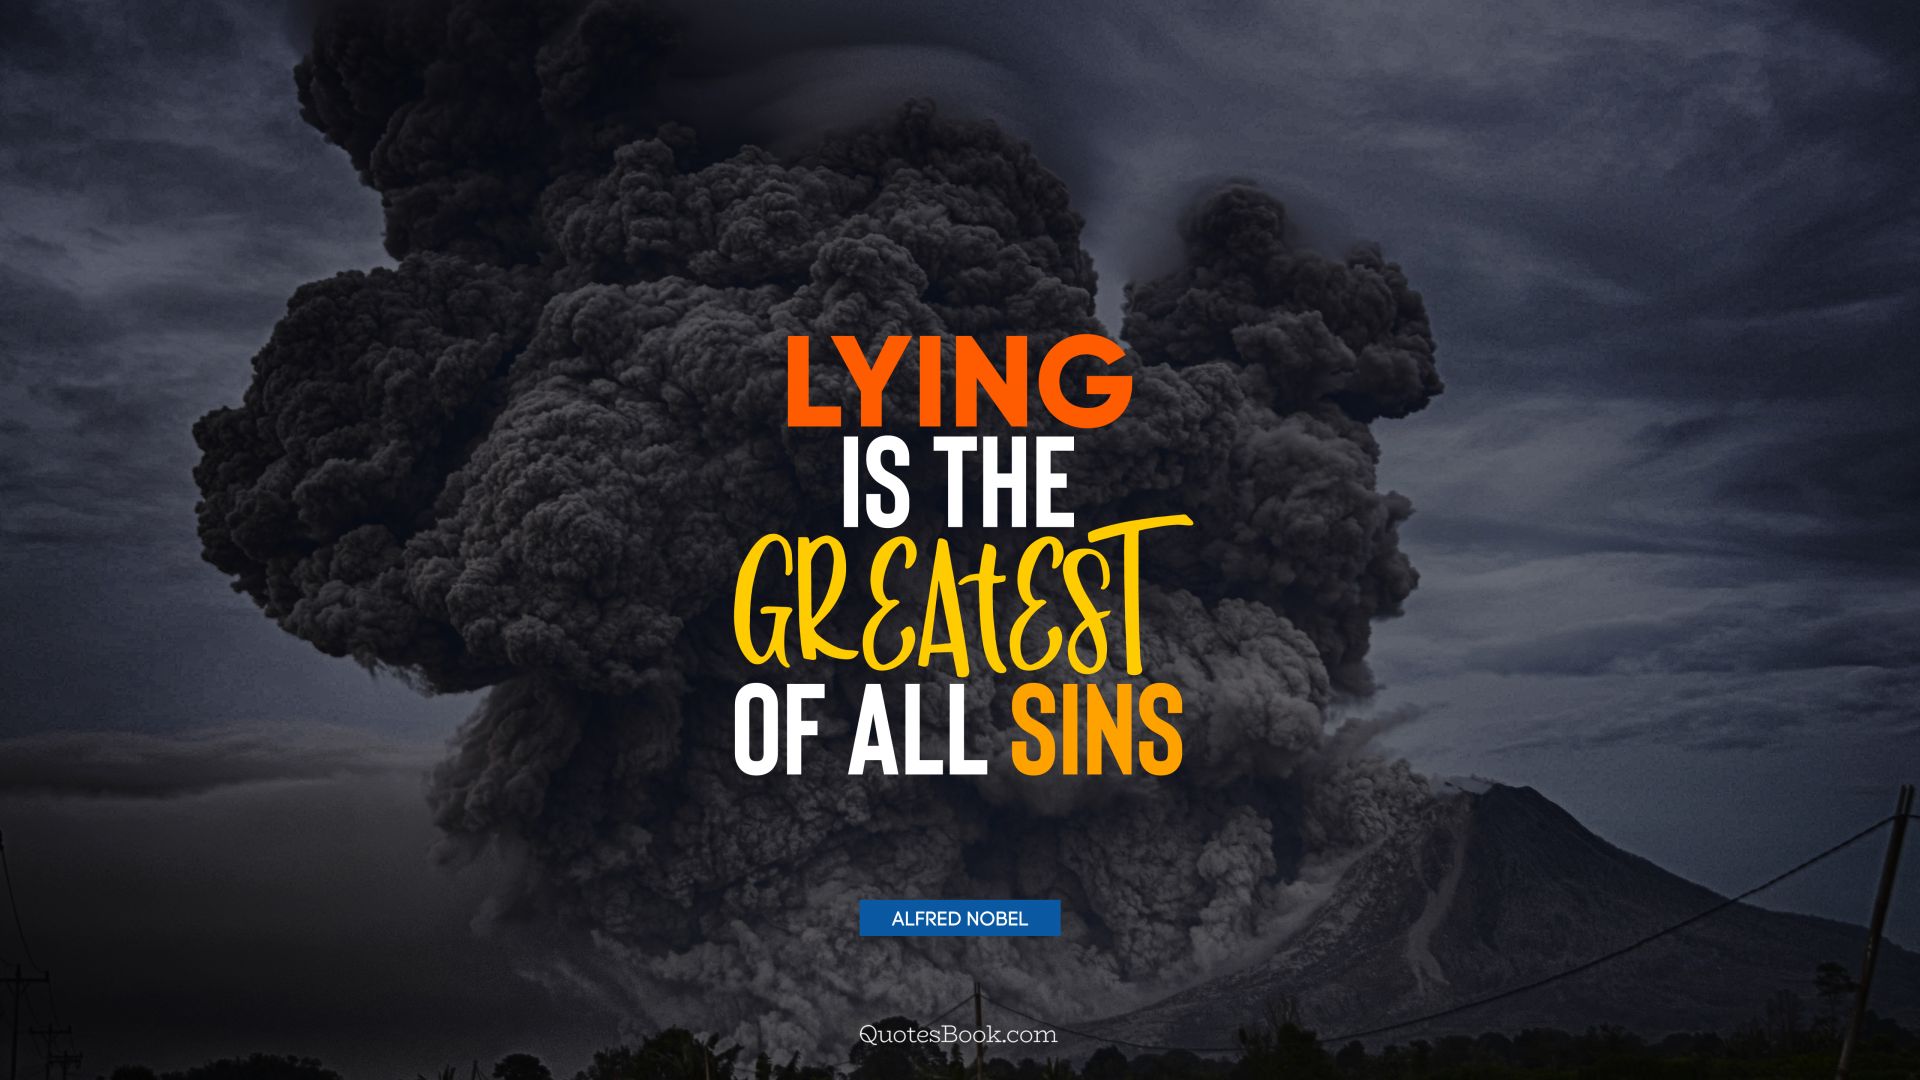 Lying is the greatest of all sins. - Quote by Alfred Nobel